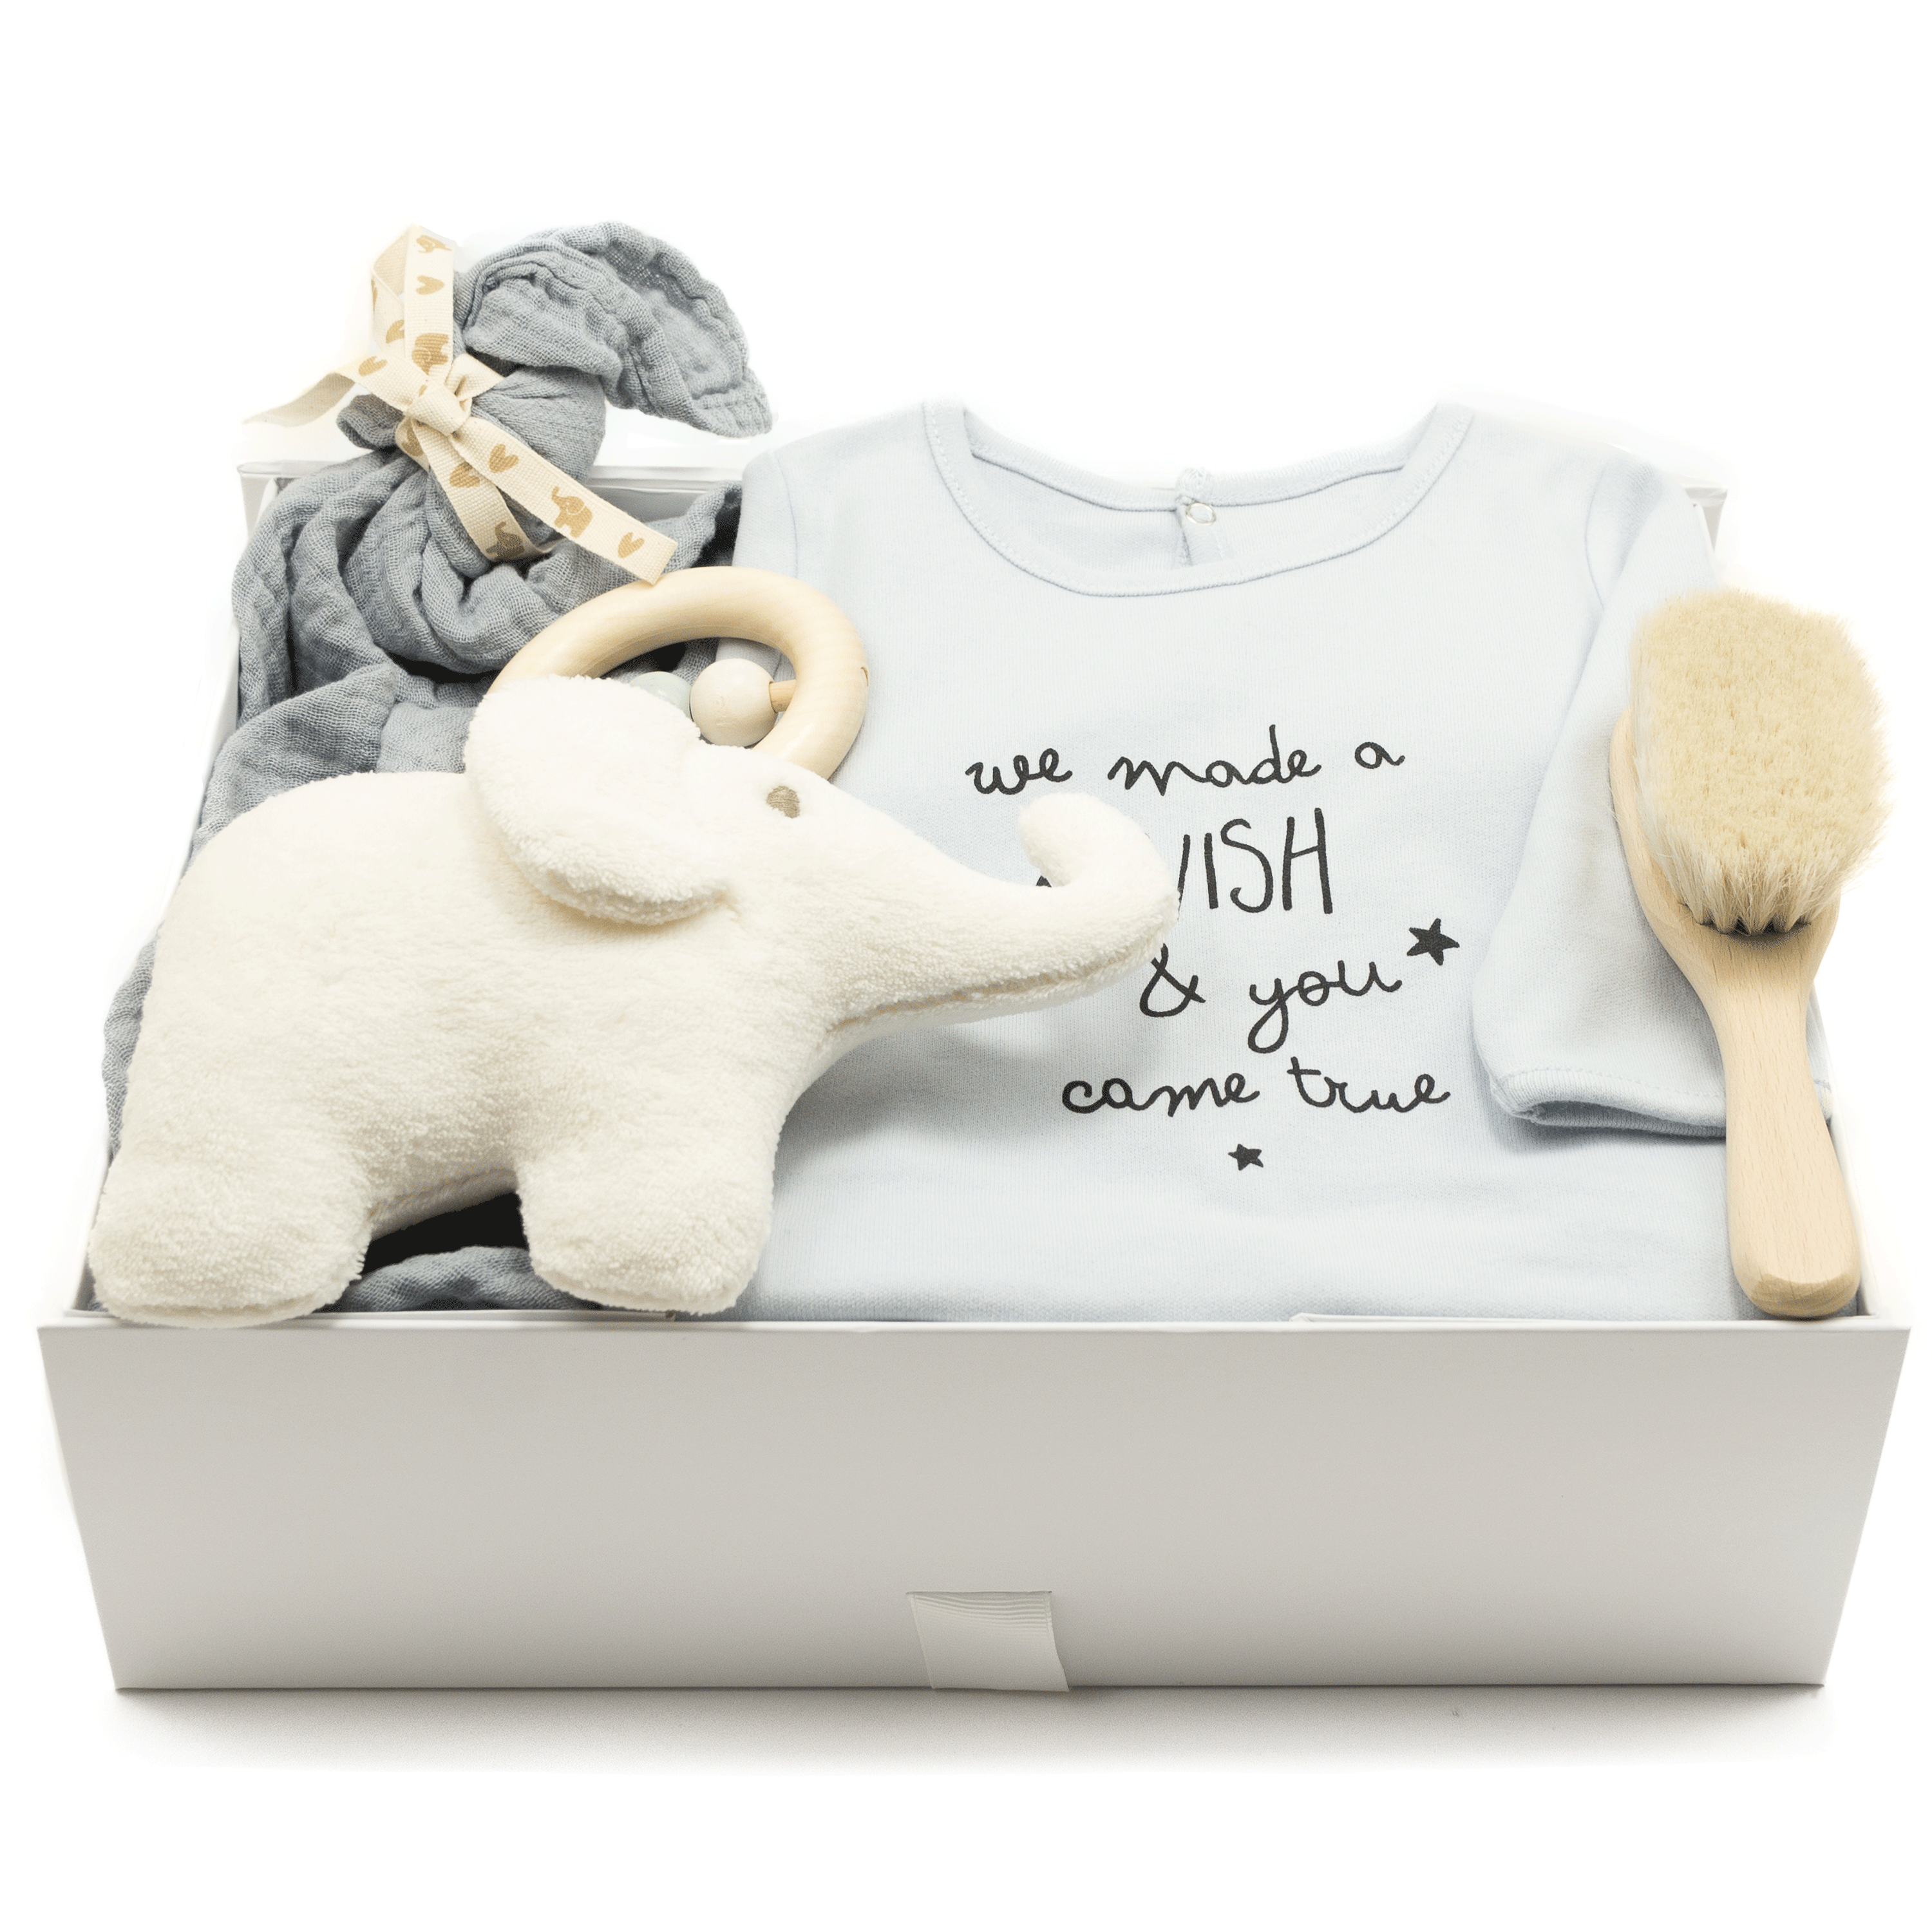 Baby boy Gift Box featuring organic products, perfect for your Corporate Baby Gifts 